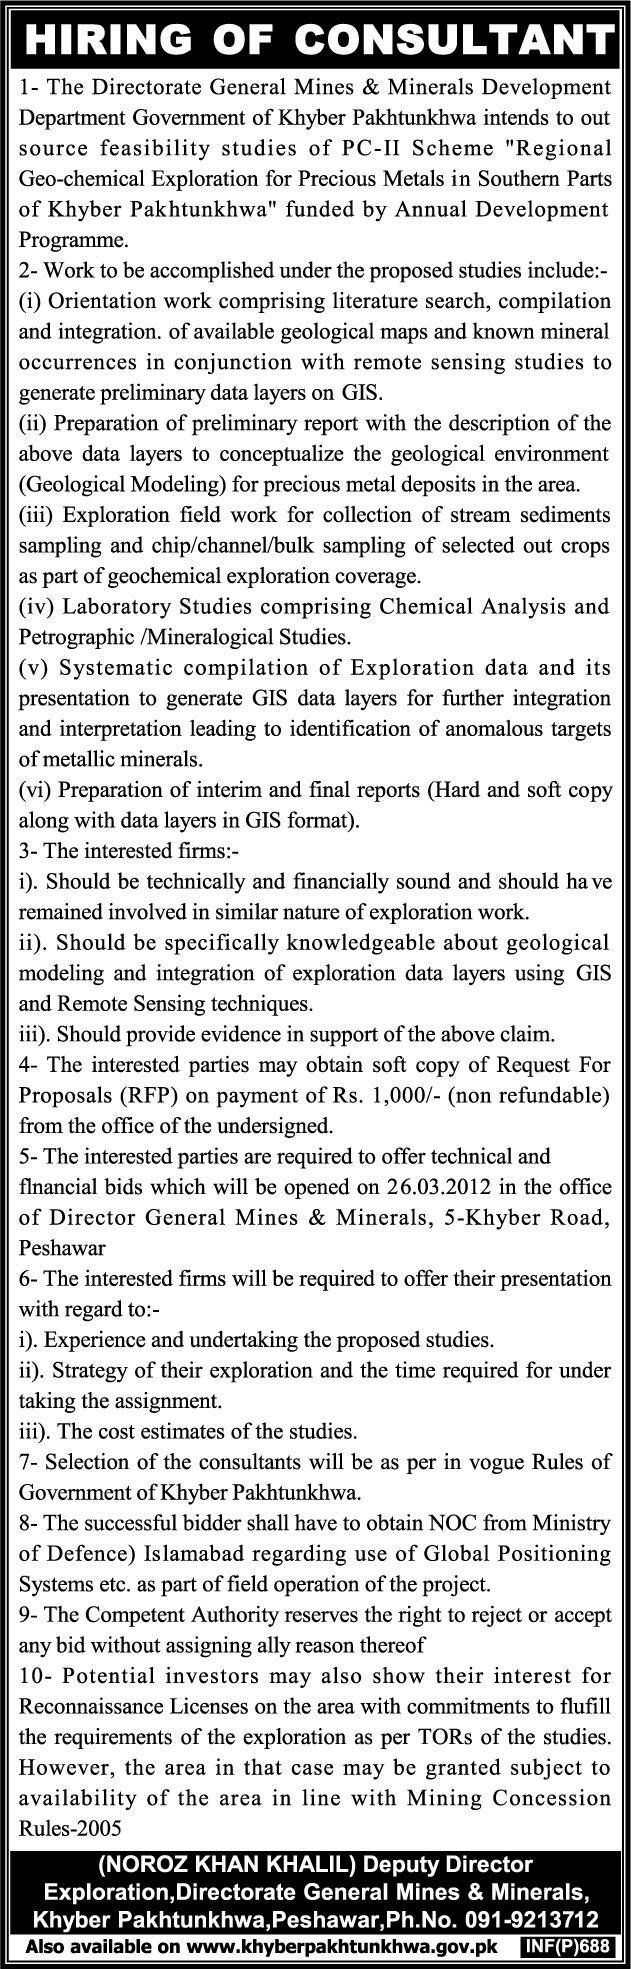 Consultant Jobs in The Directorate General Mines & Minerals Development Department Government of KPK